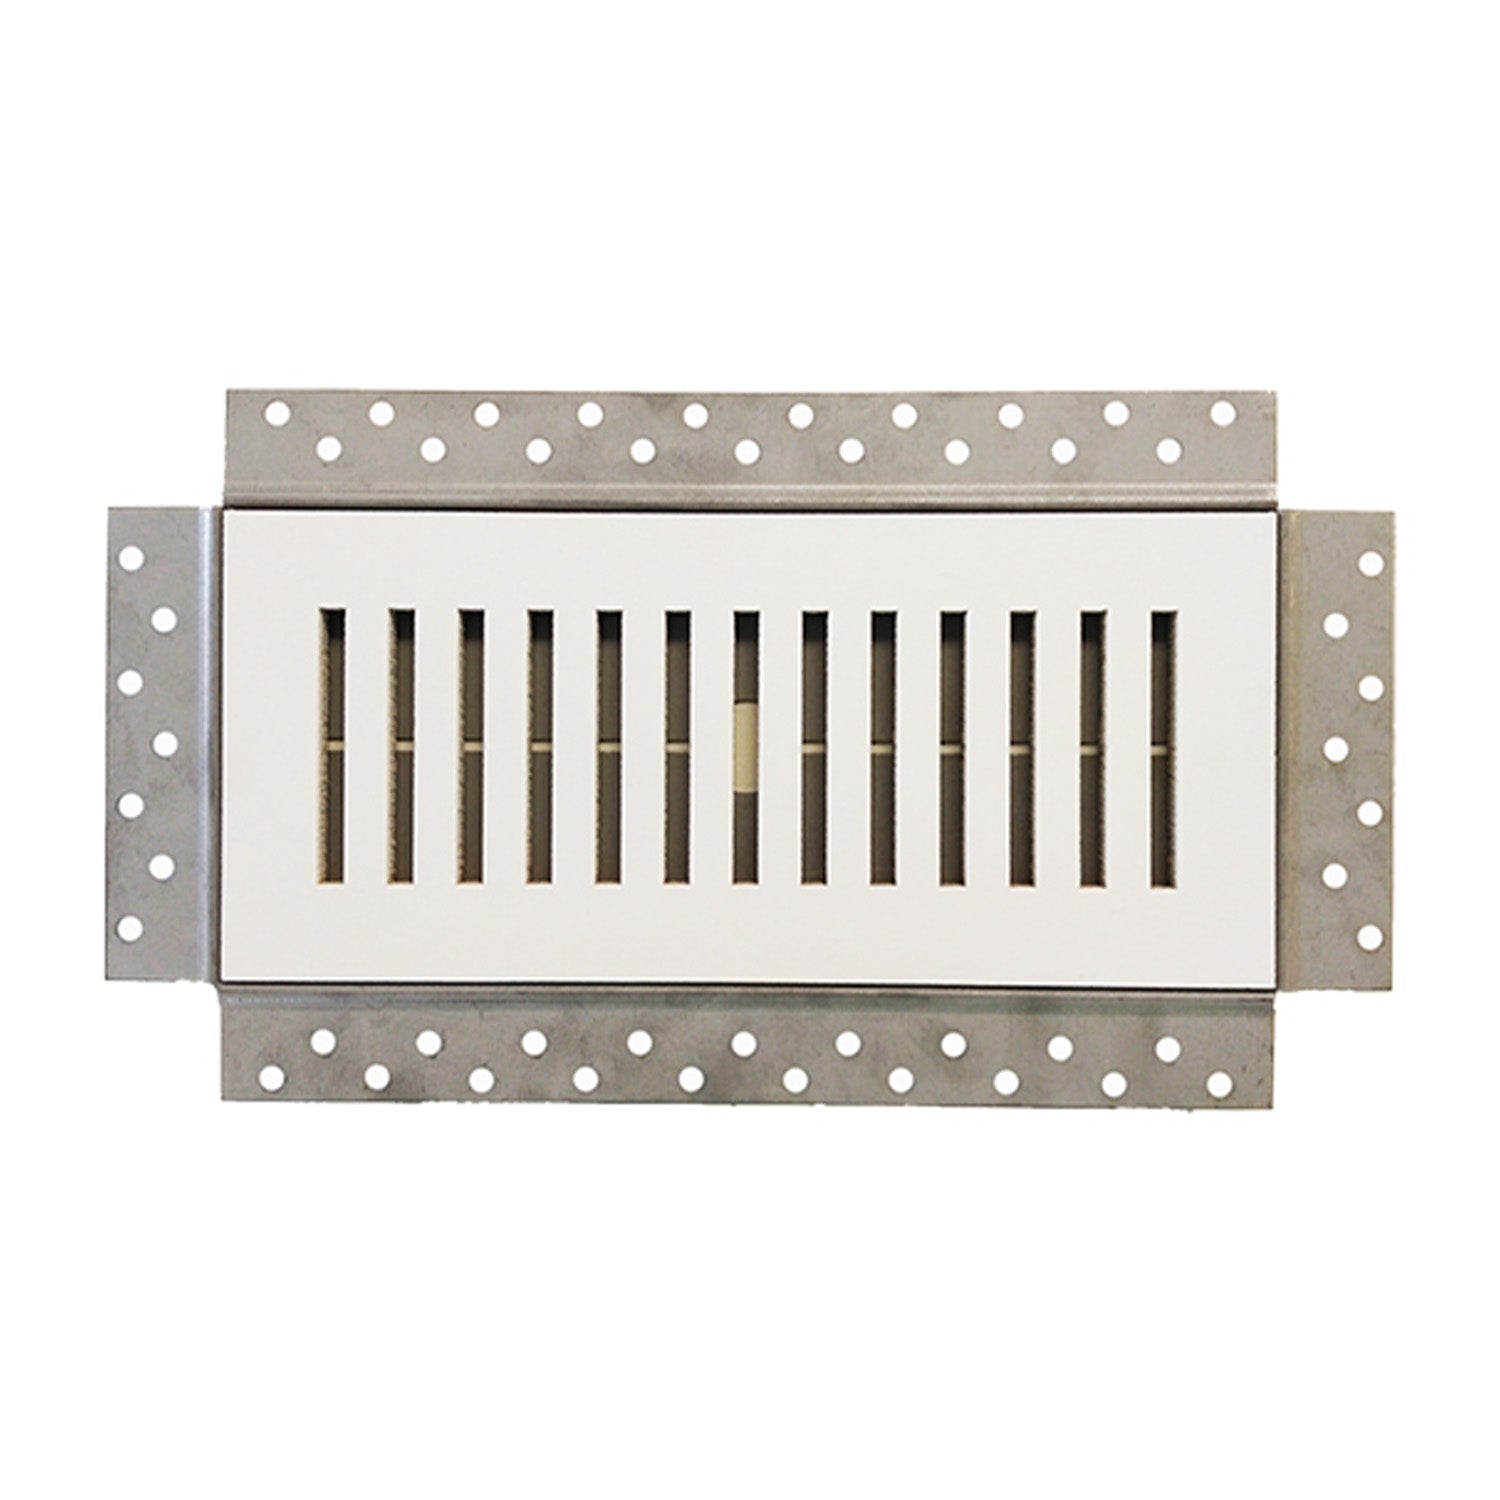 ENVISIVENT (CB5023) – Removable Magnetic Mud-In Flush Mounted Wall/Ceiling Air Supply Vent, 10” x 6” Duct